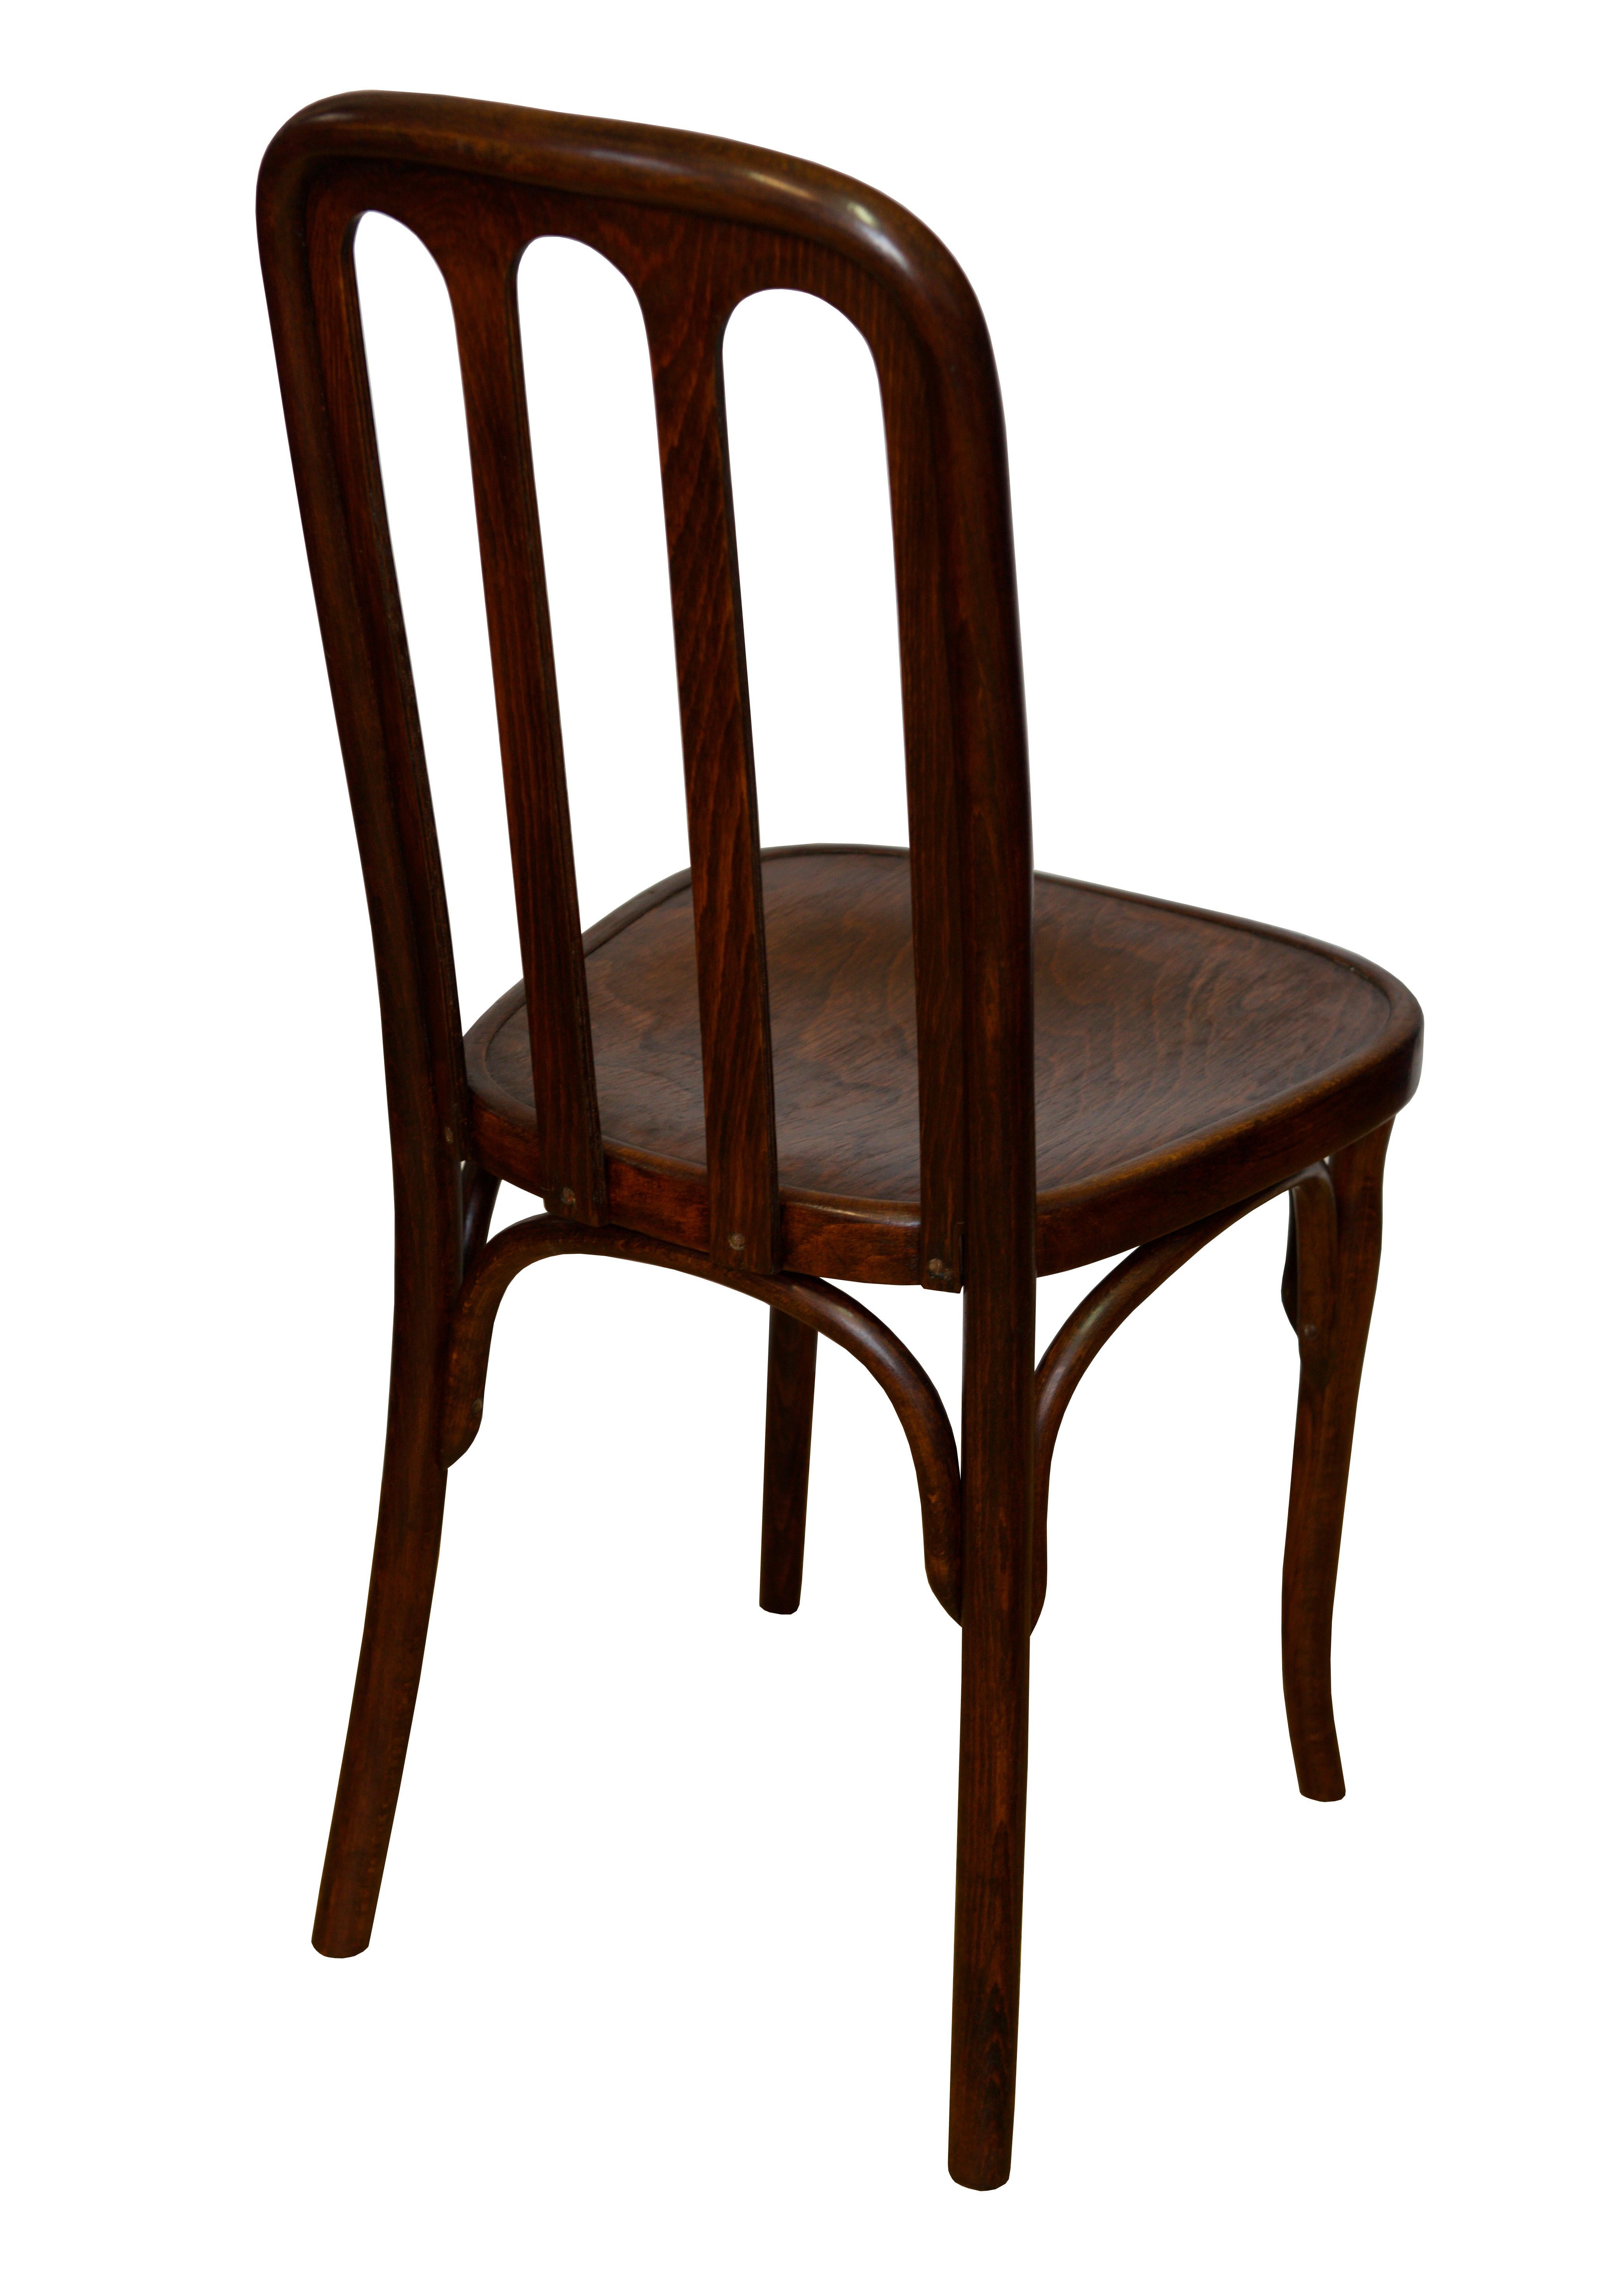 This chair is believed to be produced in 1905 by Josef and Jacob Kohn furniture Company in Wsetin, Austria and designed by the legendary Josef Hoffmann. Hoffman designed several pieces for the Kohn factory at the beginning of the 20th century.

